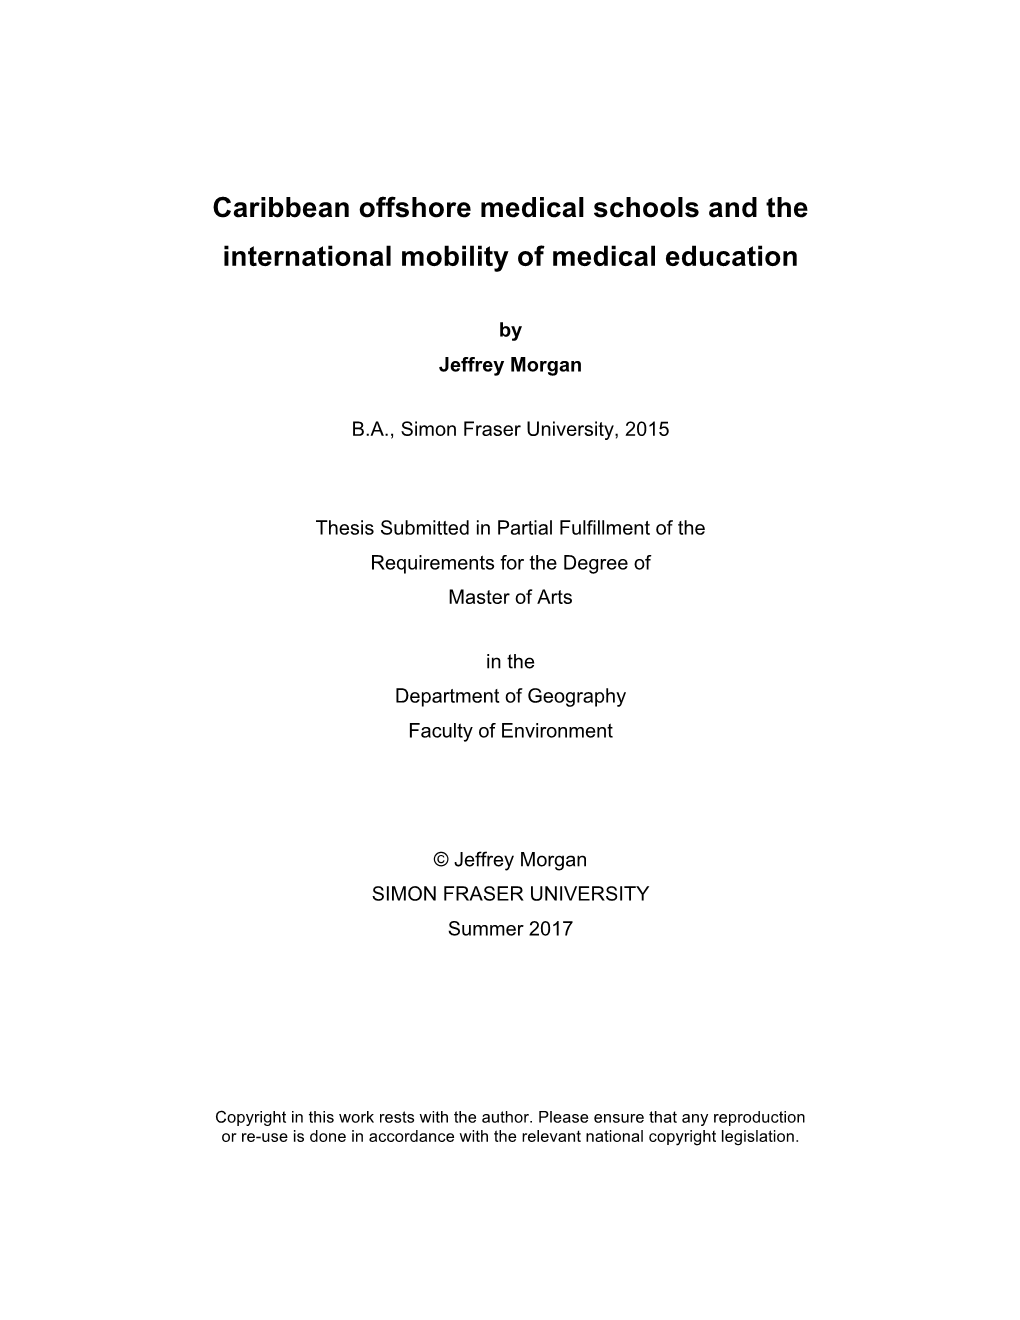 Caribbean Offshore Medical Schools and the International Mobility of Medical Education